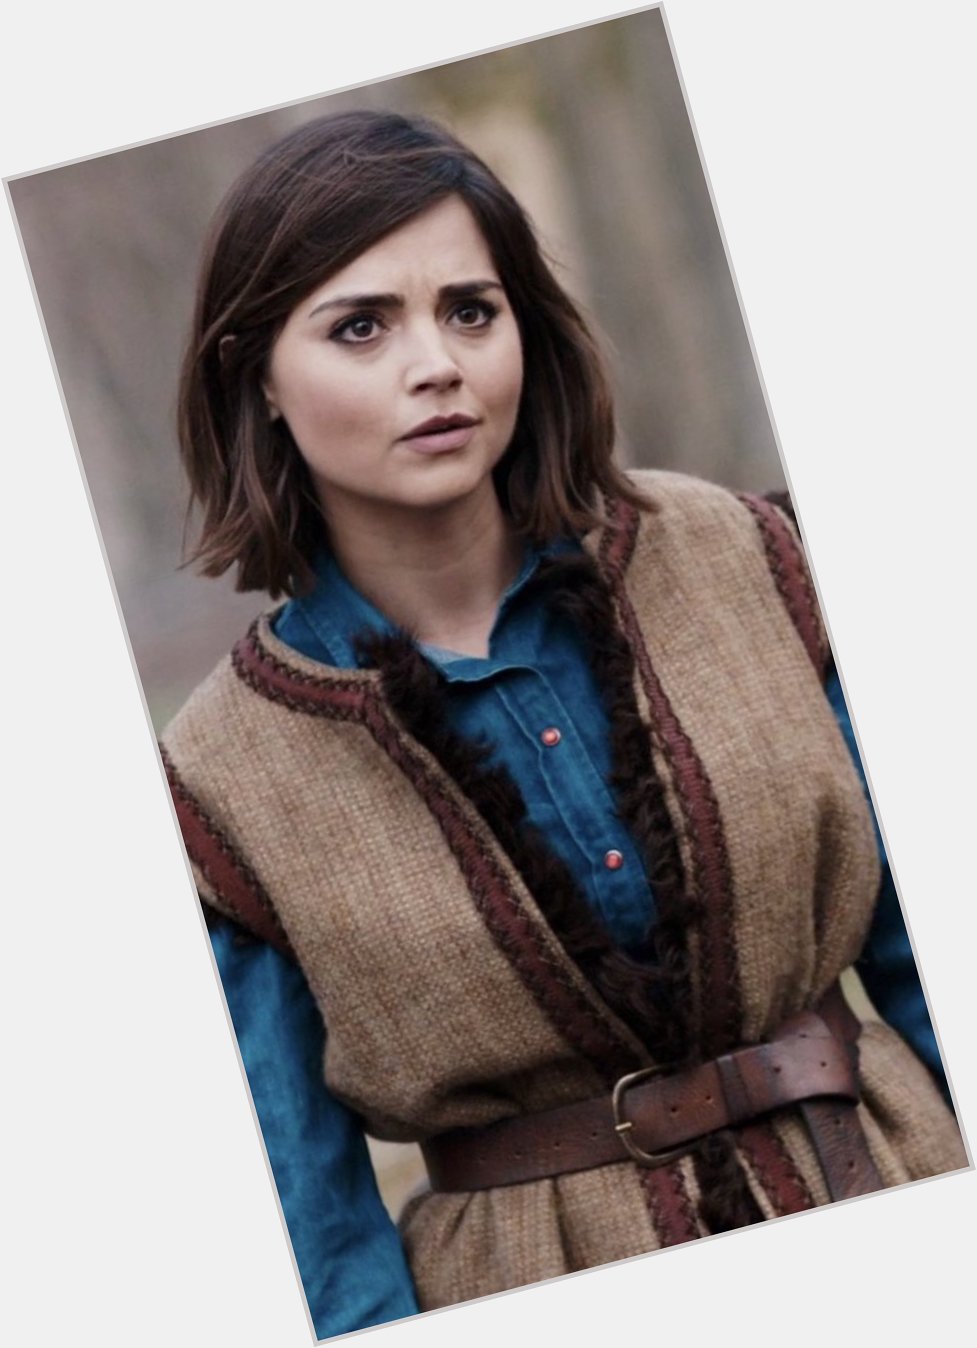 Happy Birthday Jenna Coleman. She is such a talented actress and Clara Oswald is my personal favourite companion. 